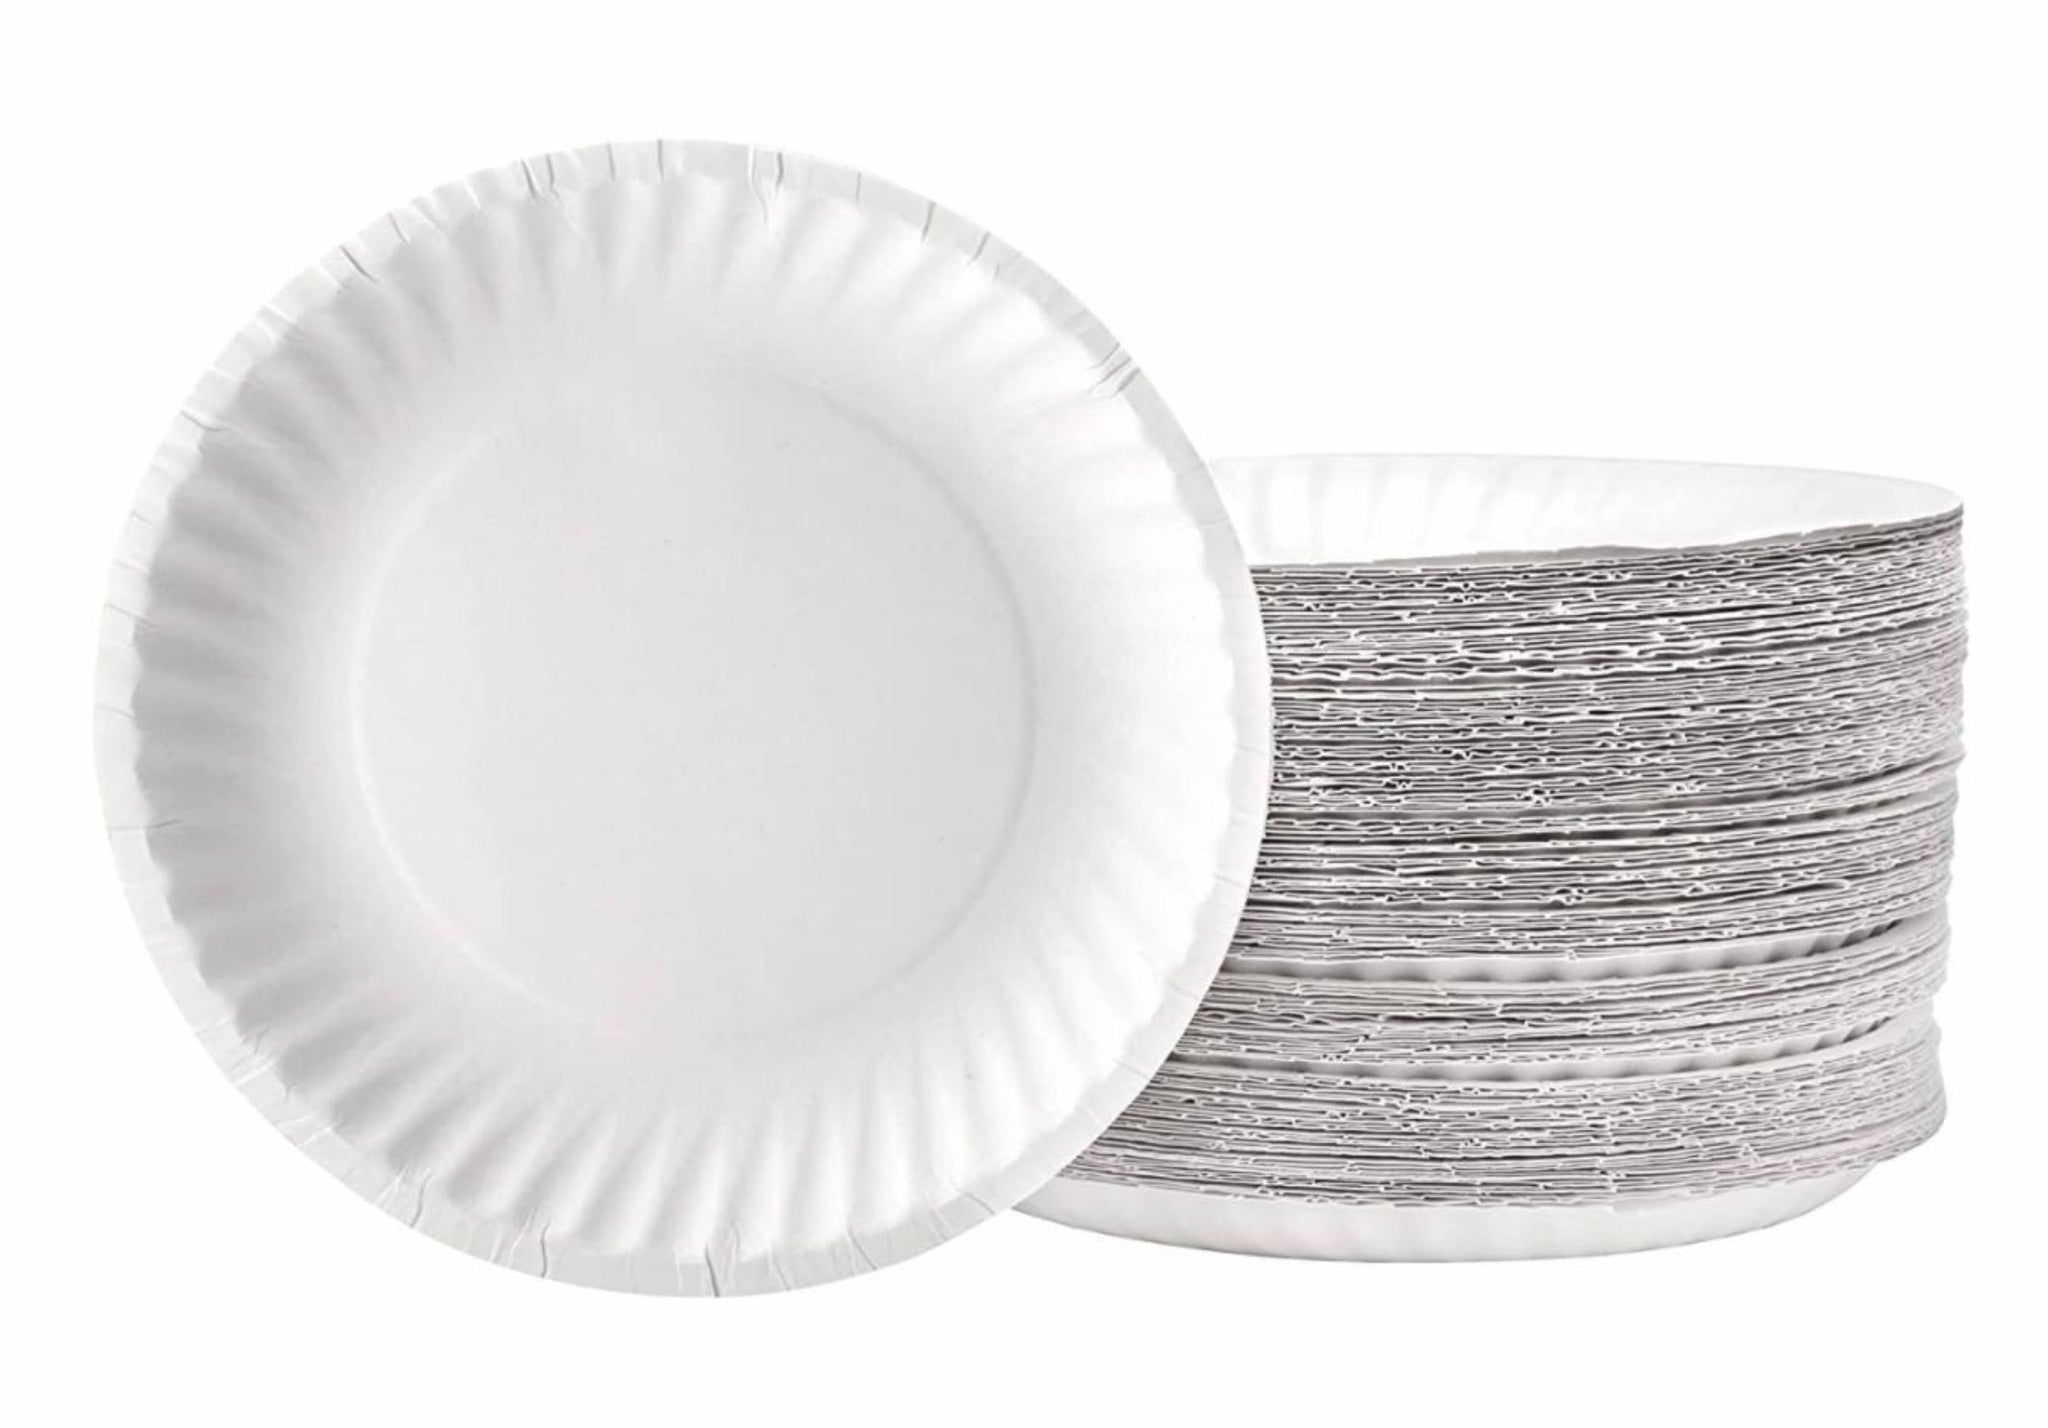 [700 COUNT] White Heavy Duty Disposable Paper Plates 9-Inch by EcoQuality -  Perfect for Parties, BBQ, Catering, Office, Event's, Pizza, Restaurants